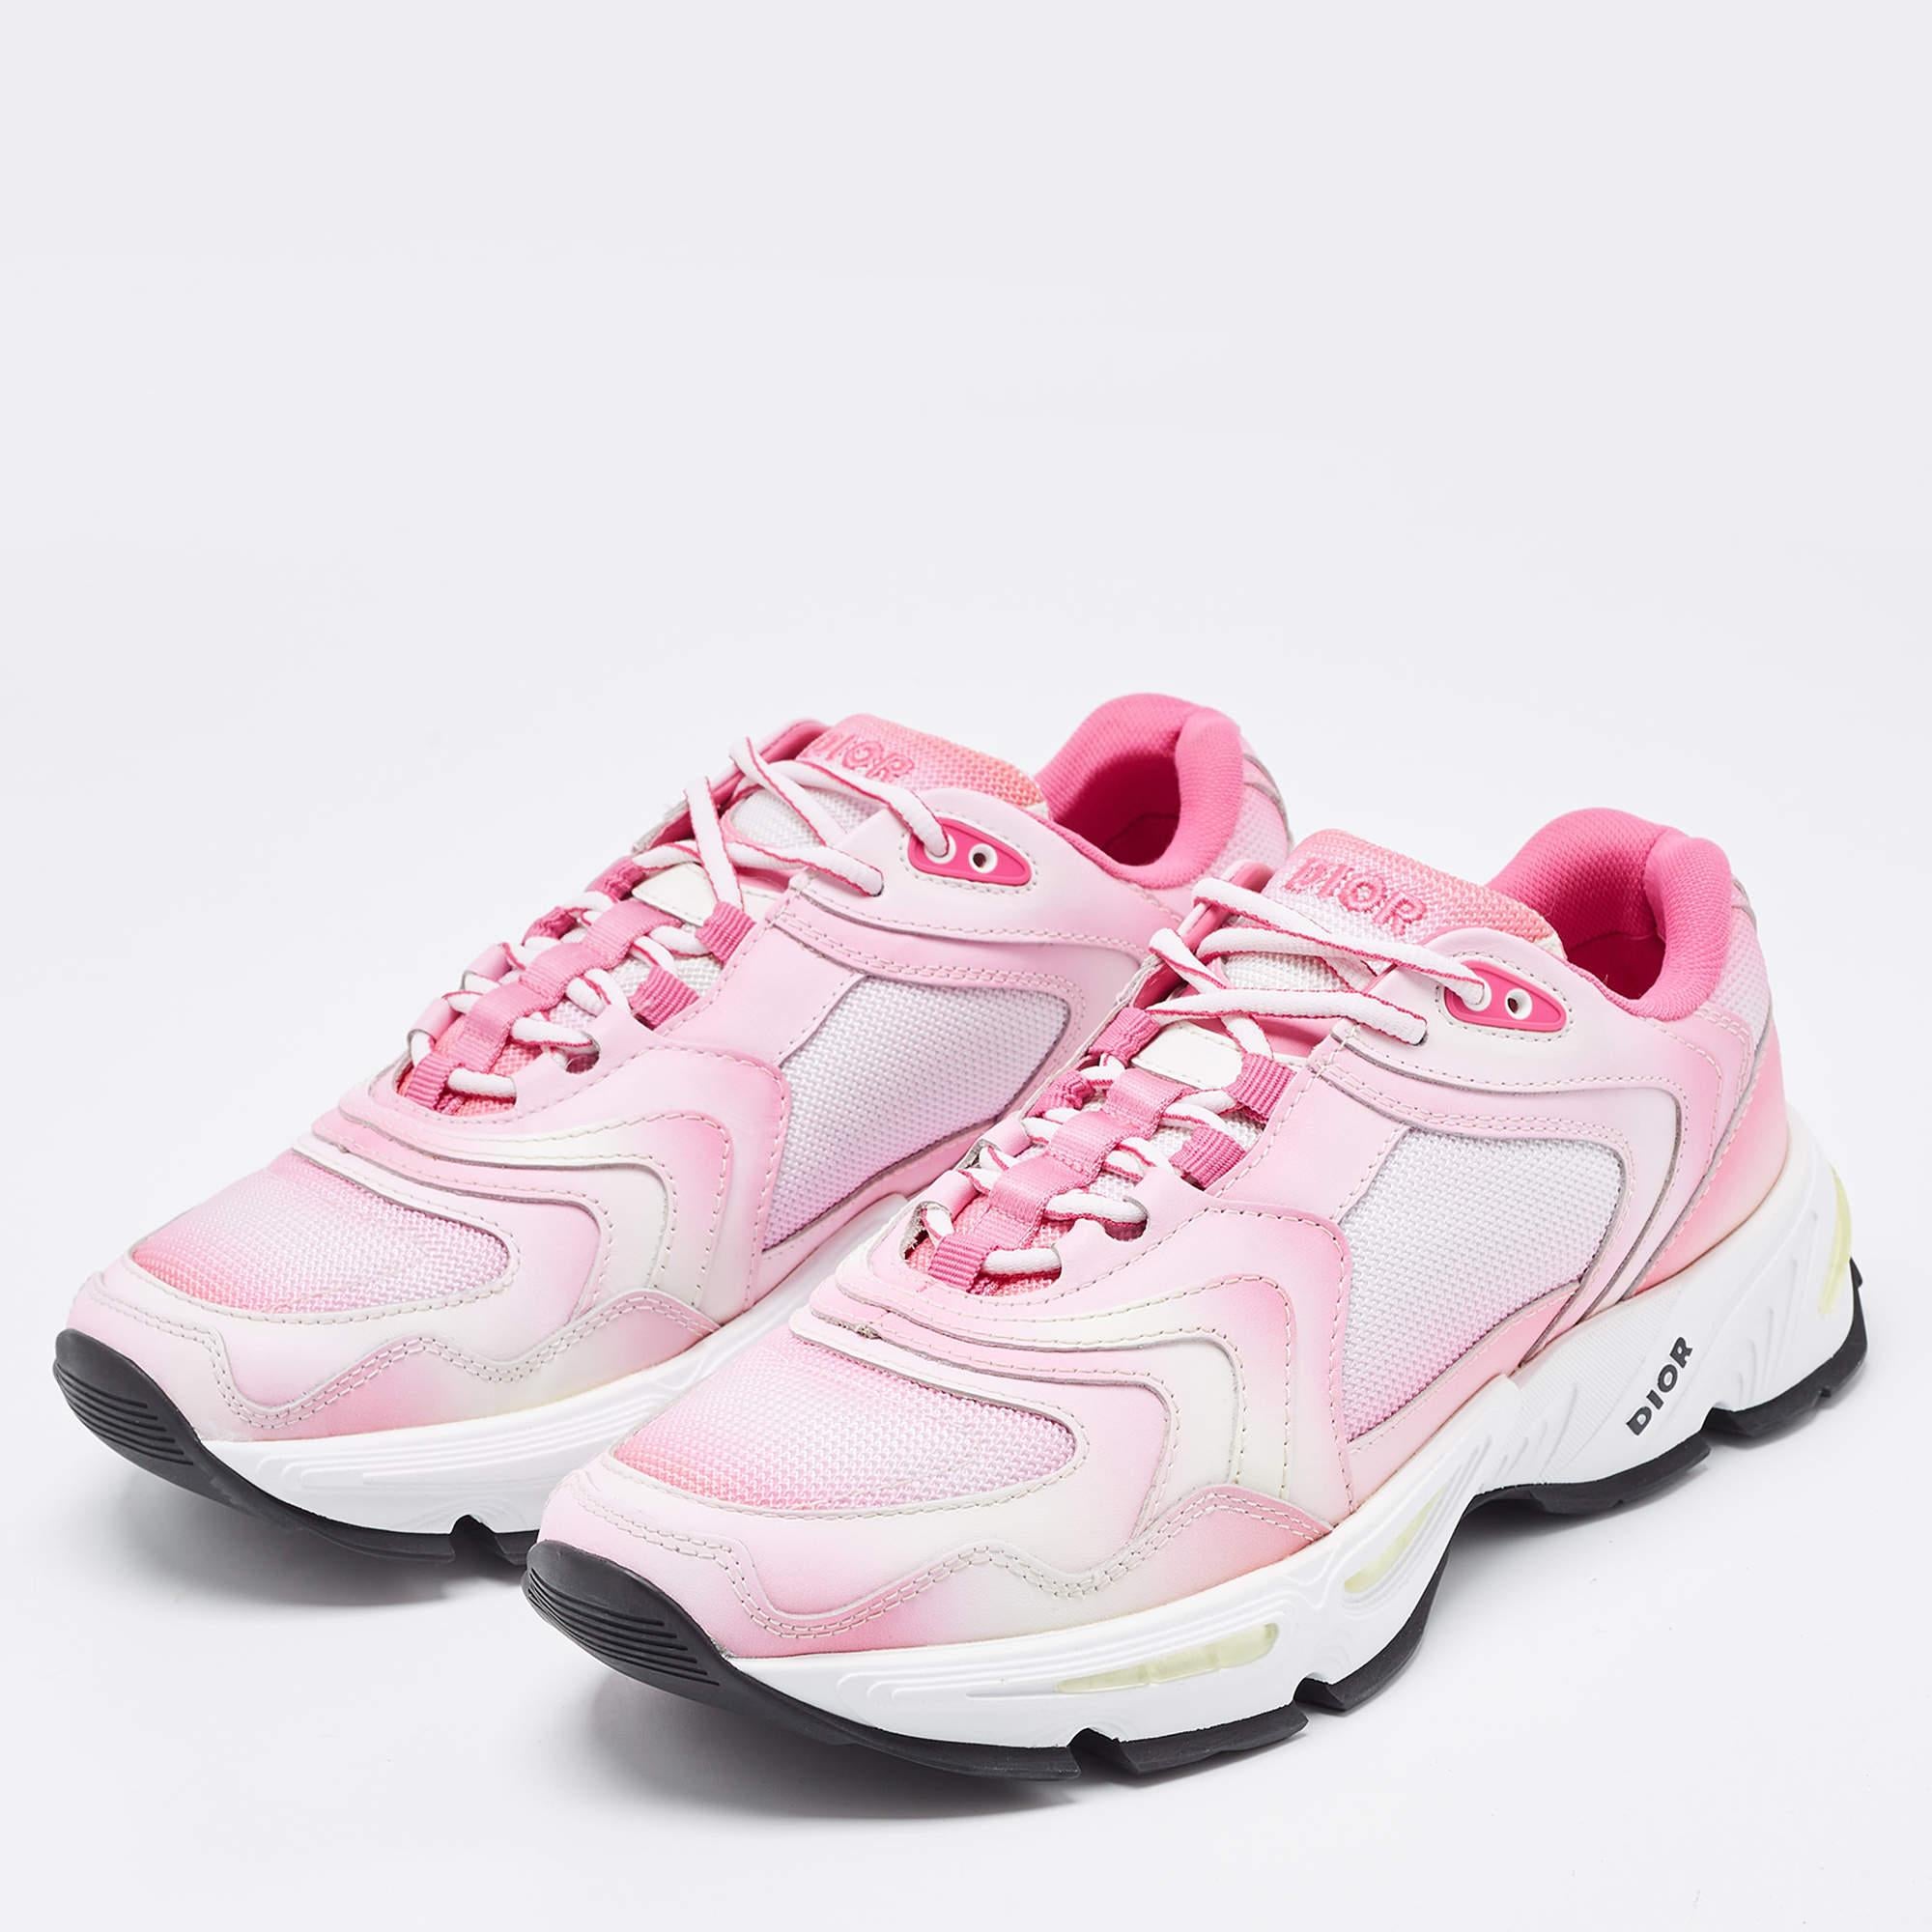 Dior Pink/White Mesh and Leather CD1 Gradient Sneakers Size 41 For Sale 2